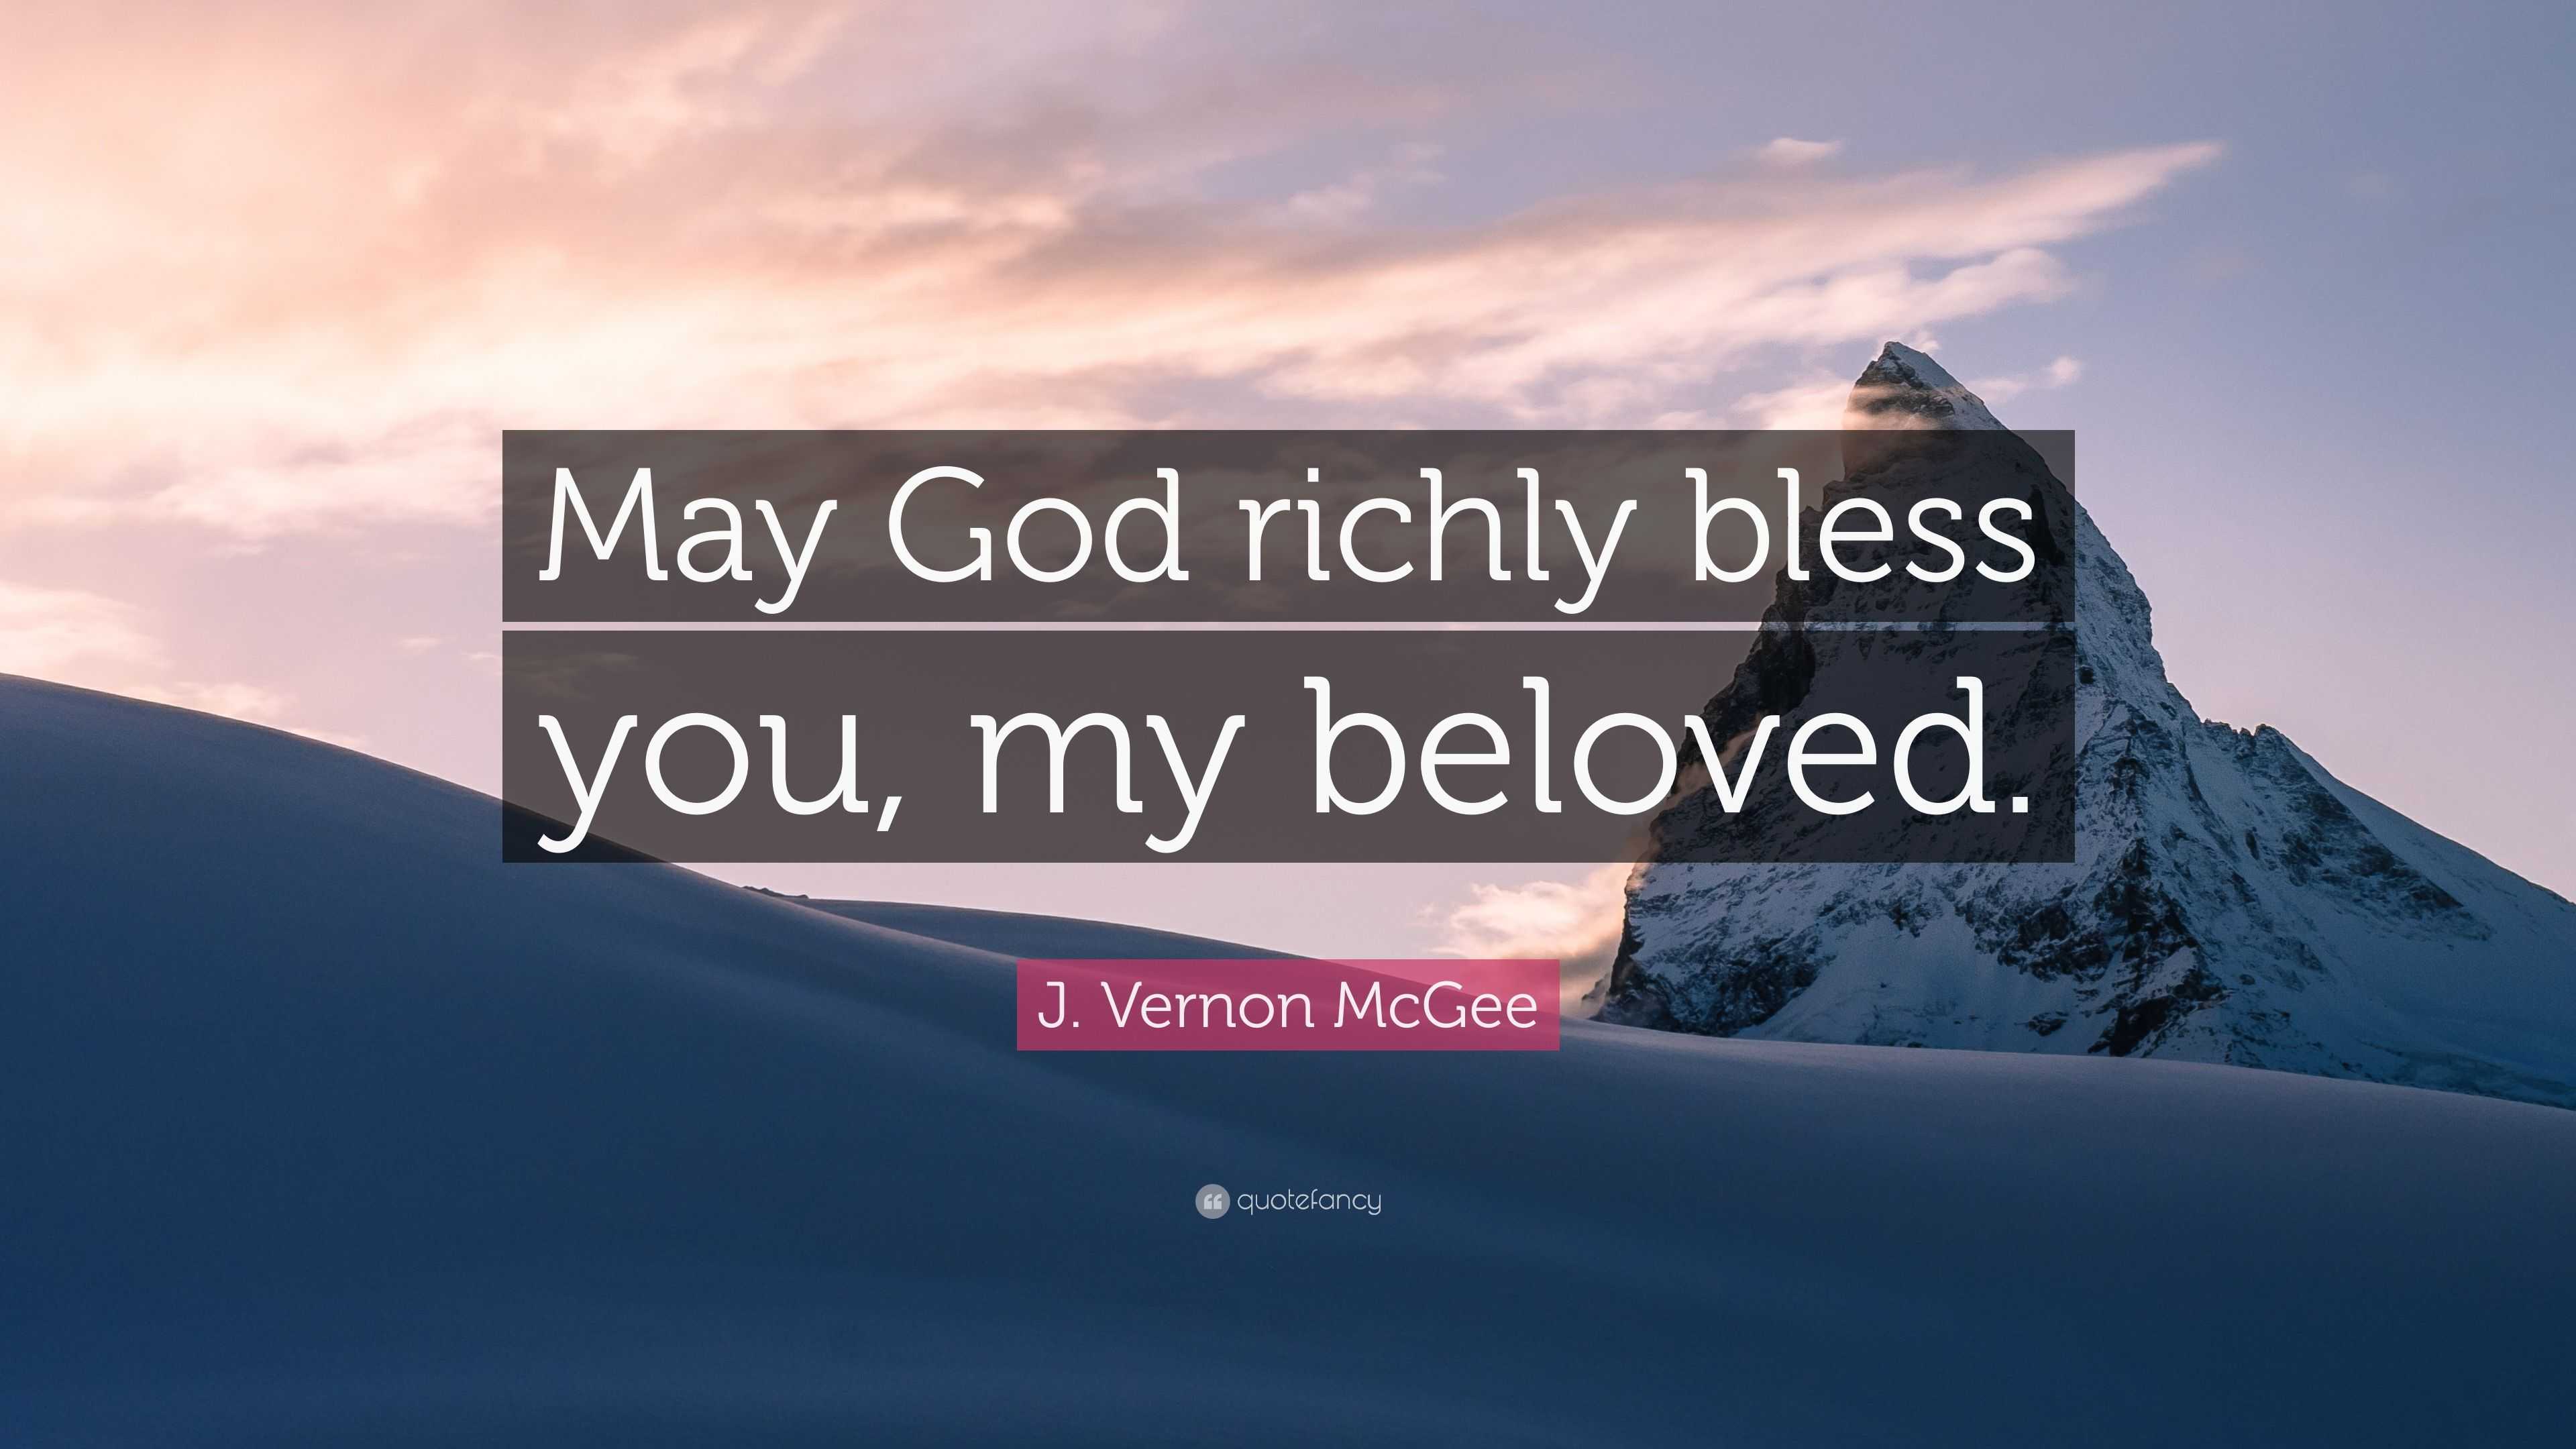 2508102 J Vernon McGee Quote May God richly bless you my beloved